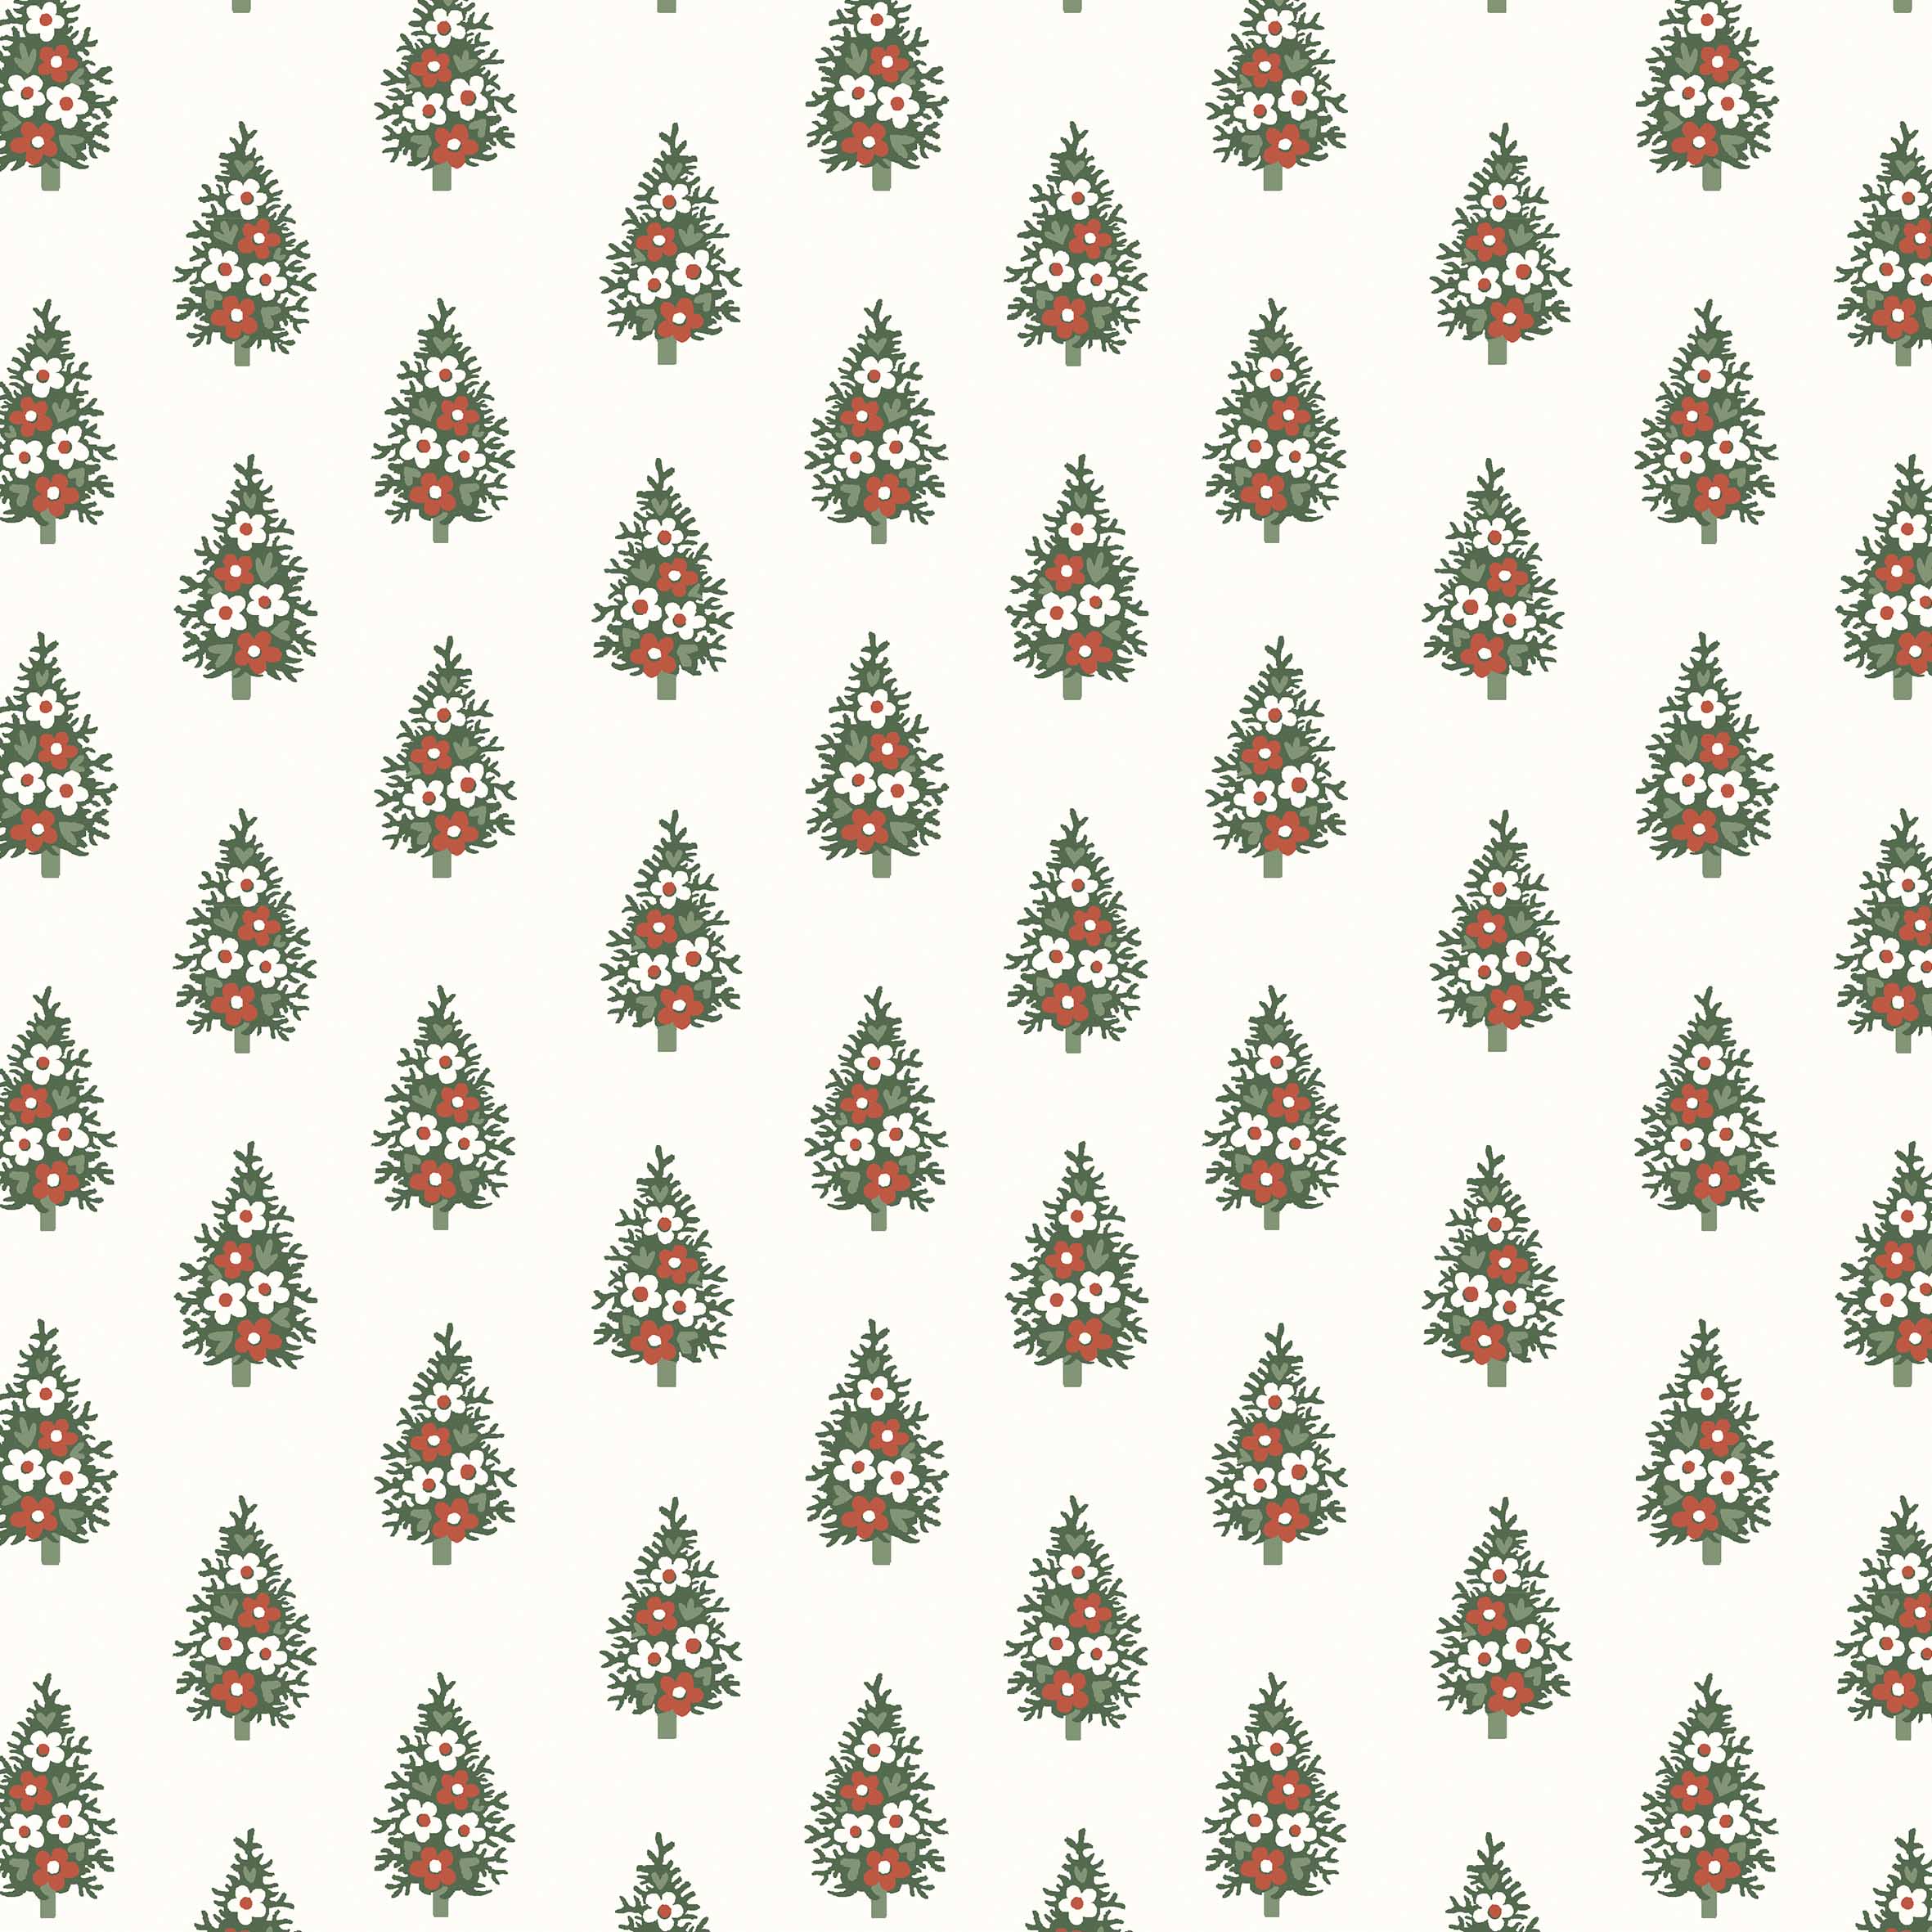 Festive firs stand neat and tall in this structured design, inspired by a Liberty wood block print dating from around the 1950s. Perfectly shaped and decorated with simplified flowers, these tiny trees are also a subtle nod to Liberty traditional paisley heritage.